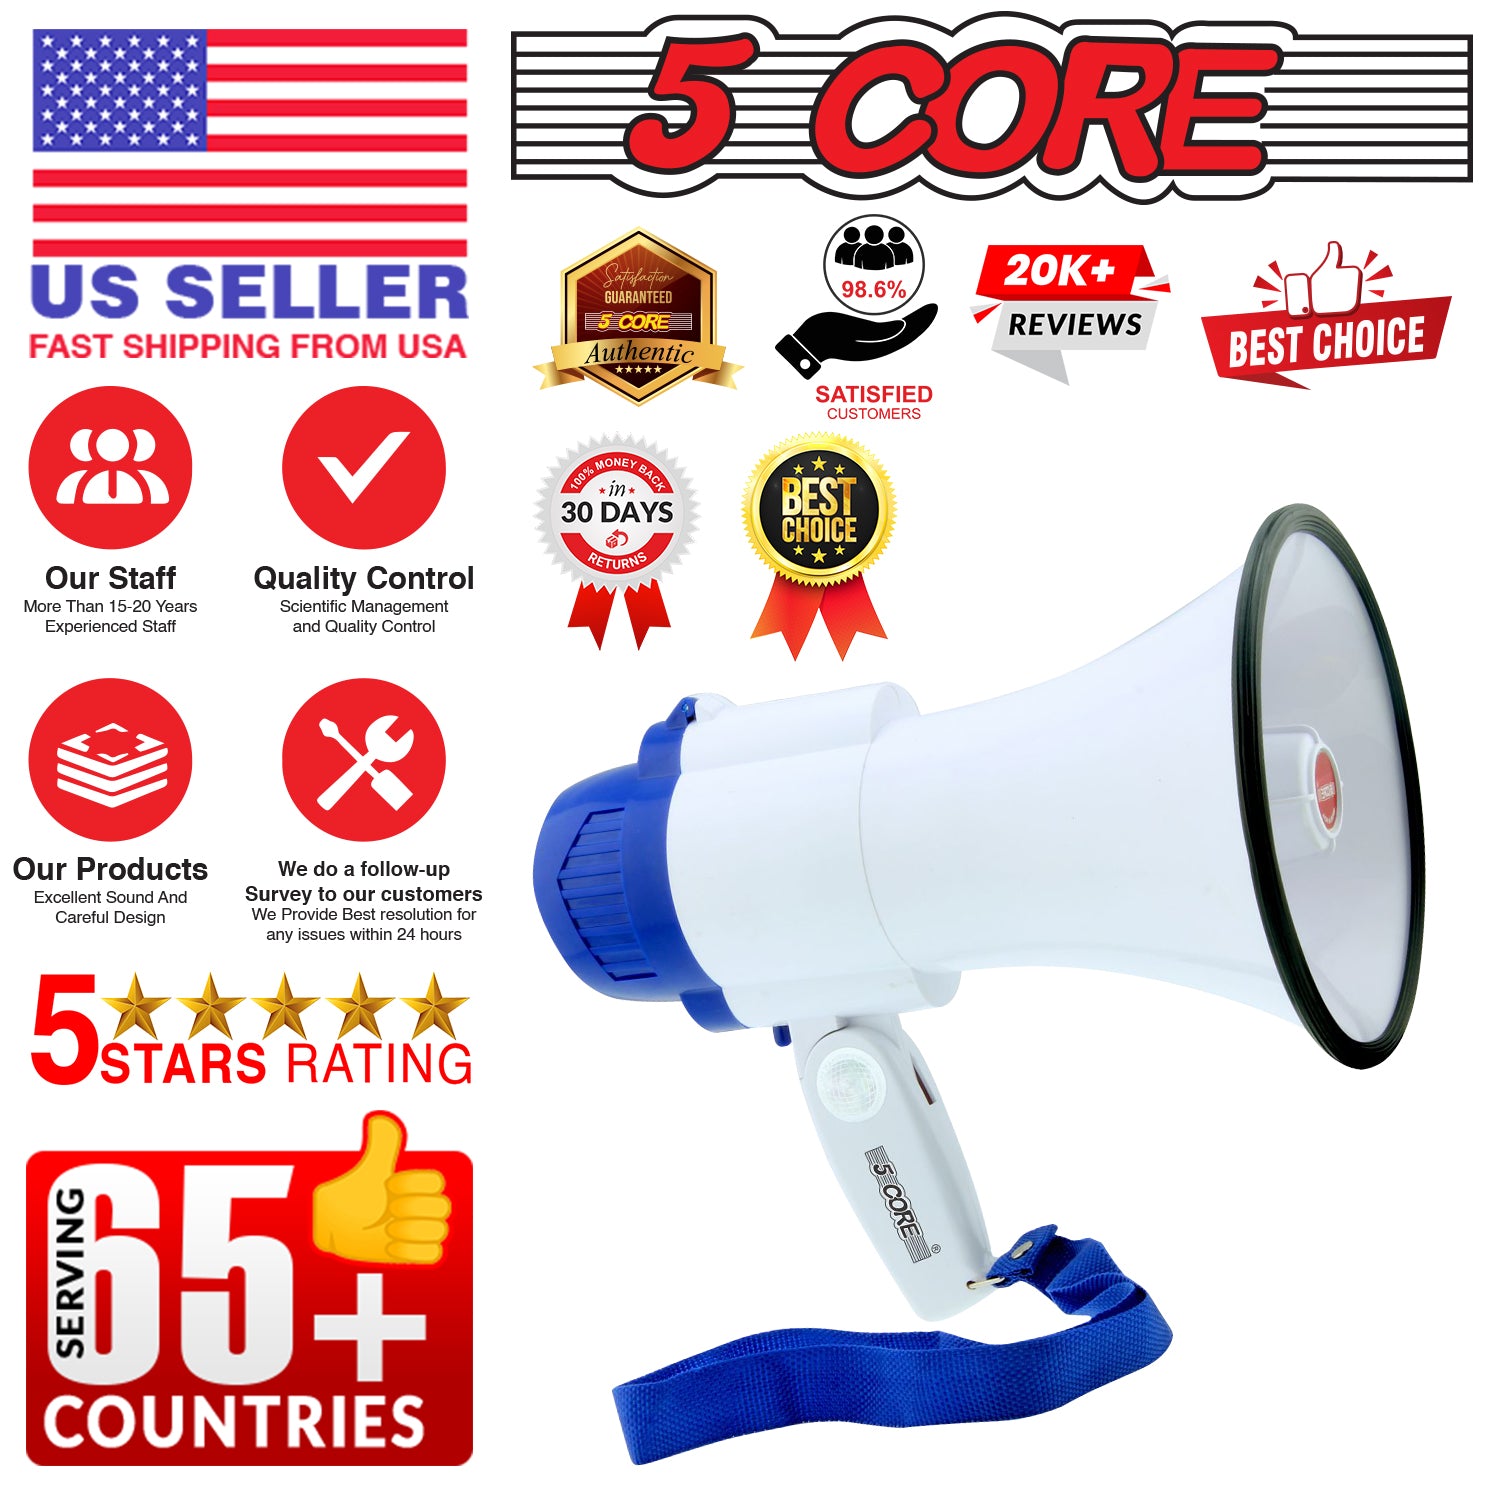 5 Core Megaphone Bull Horn 30W Loud Speaker 800 Yards Range Rechargeable Portable USB  Bullhorn w Recording Volume Control Siren Noise Maker for Kids and Adults for Cheerleading Football Safety Drills -8R-USB WOB